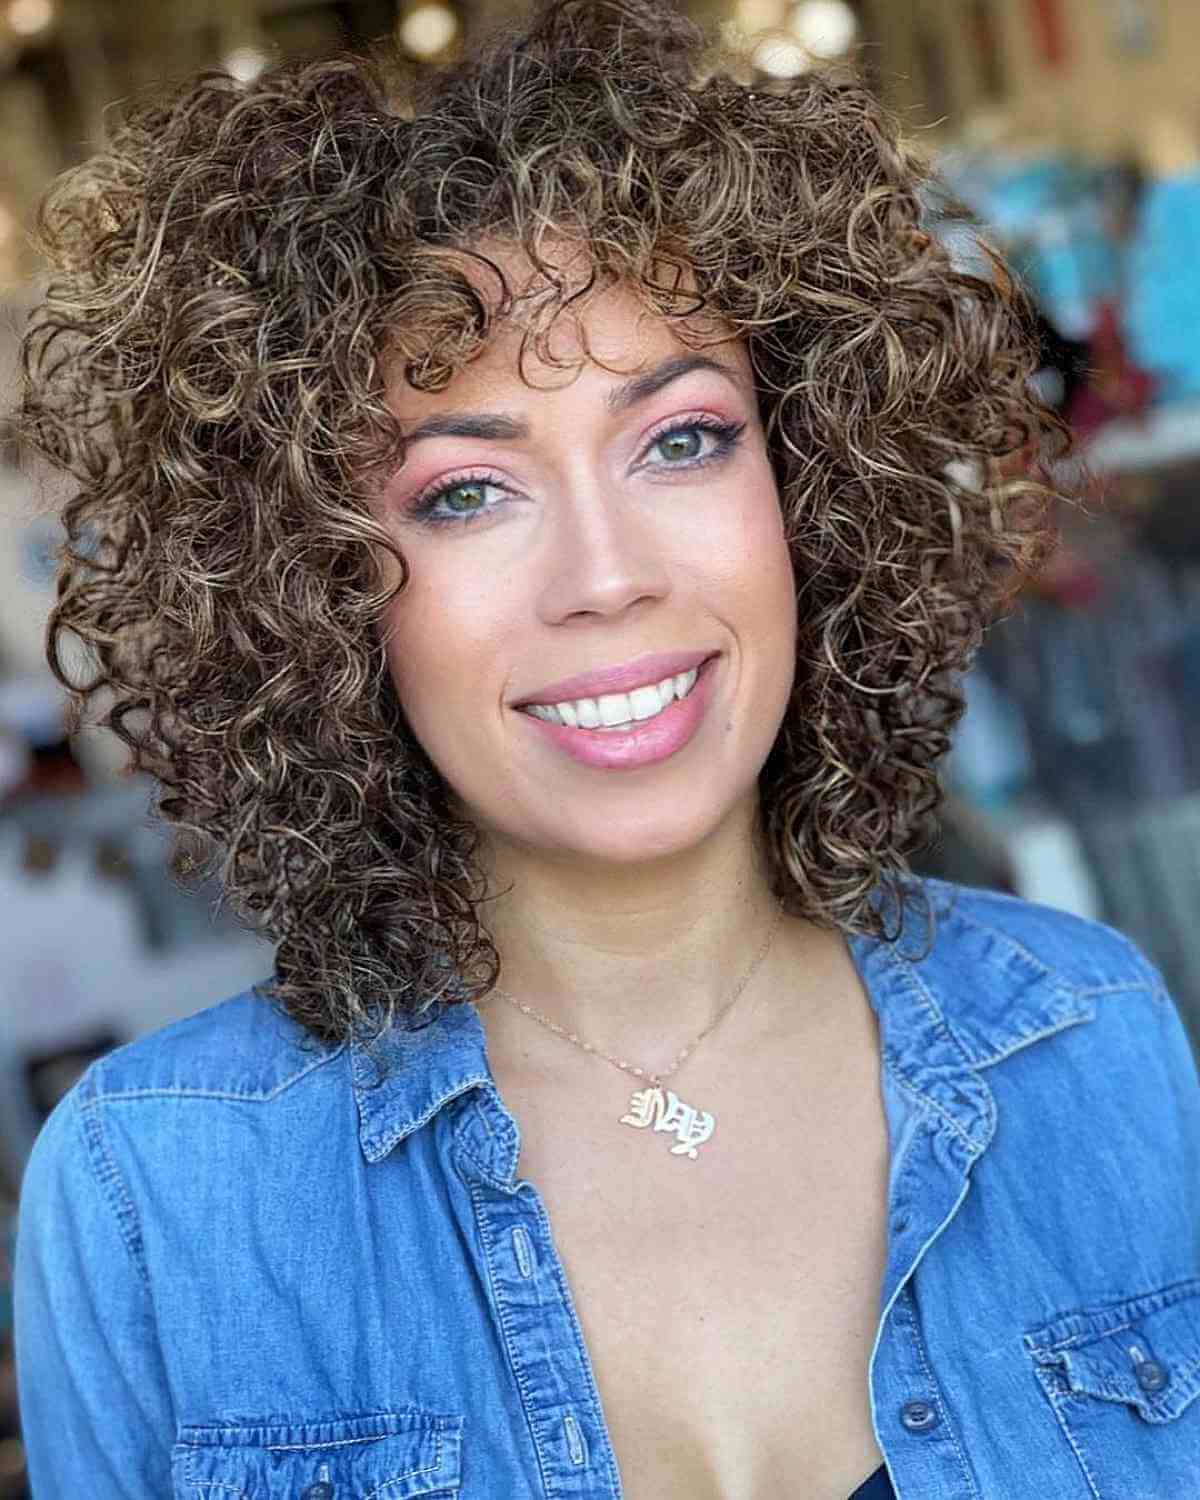 Light Brown Curly Hair with Blonde Highlights